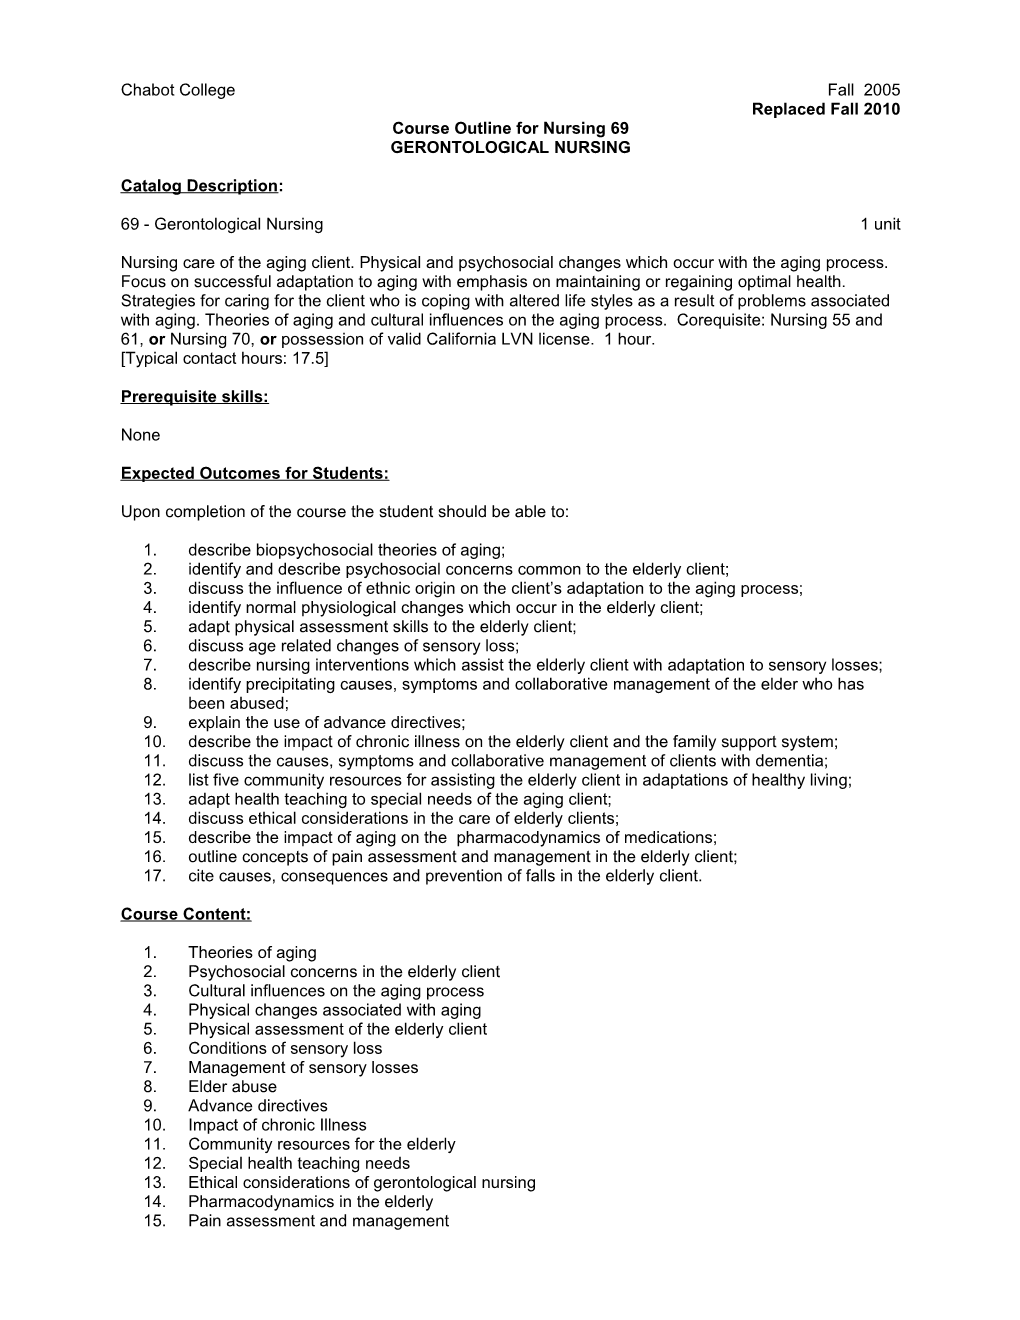 Course Outline for Nursing 69, Page 1